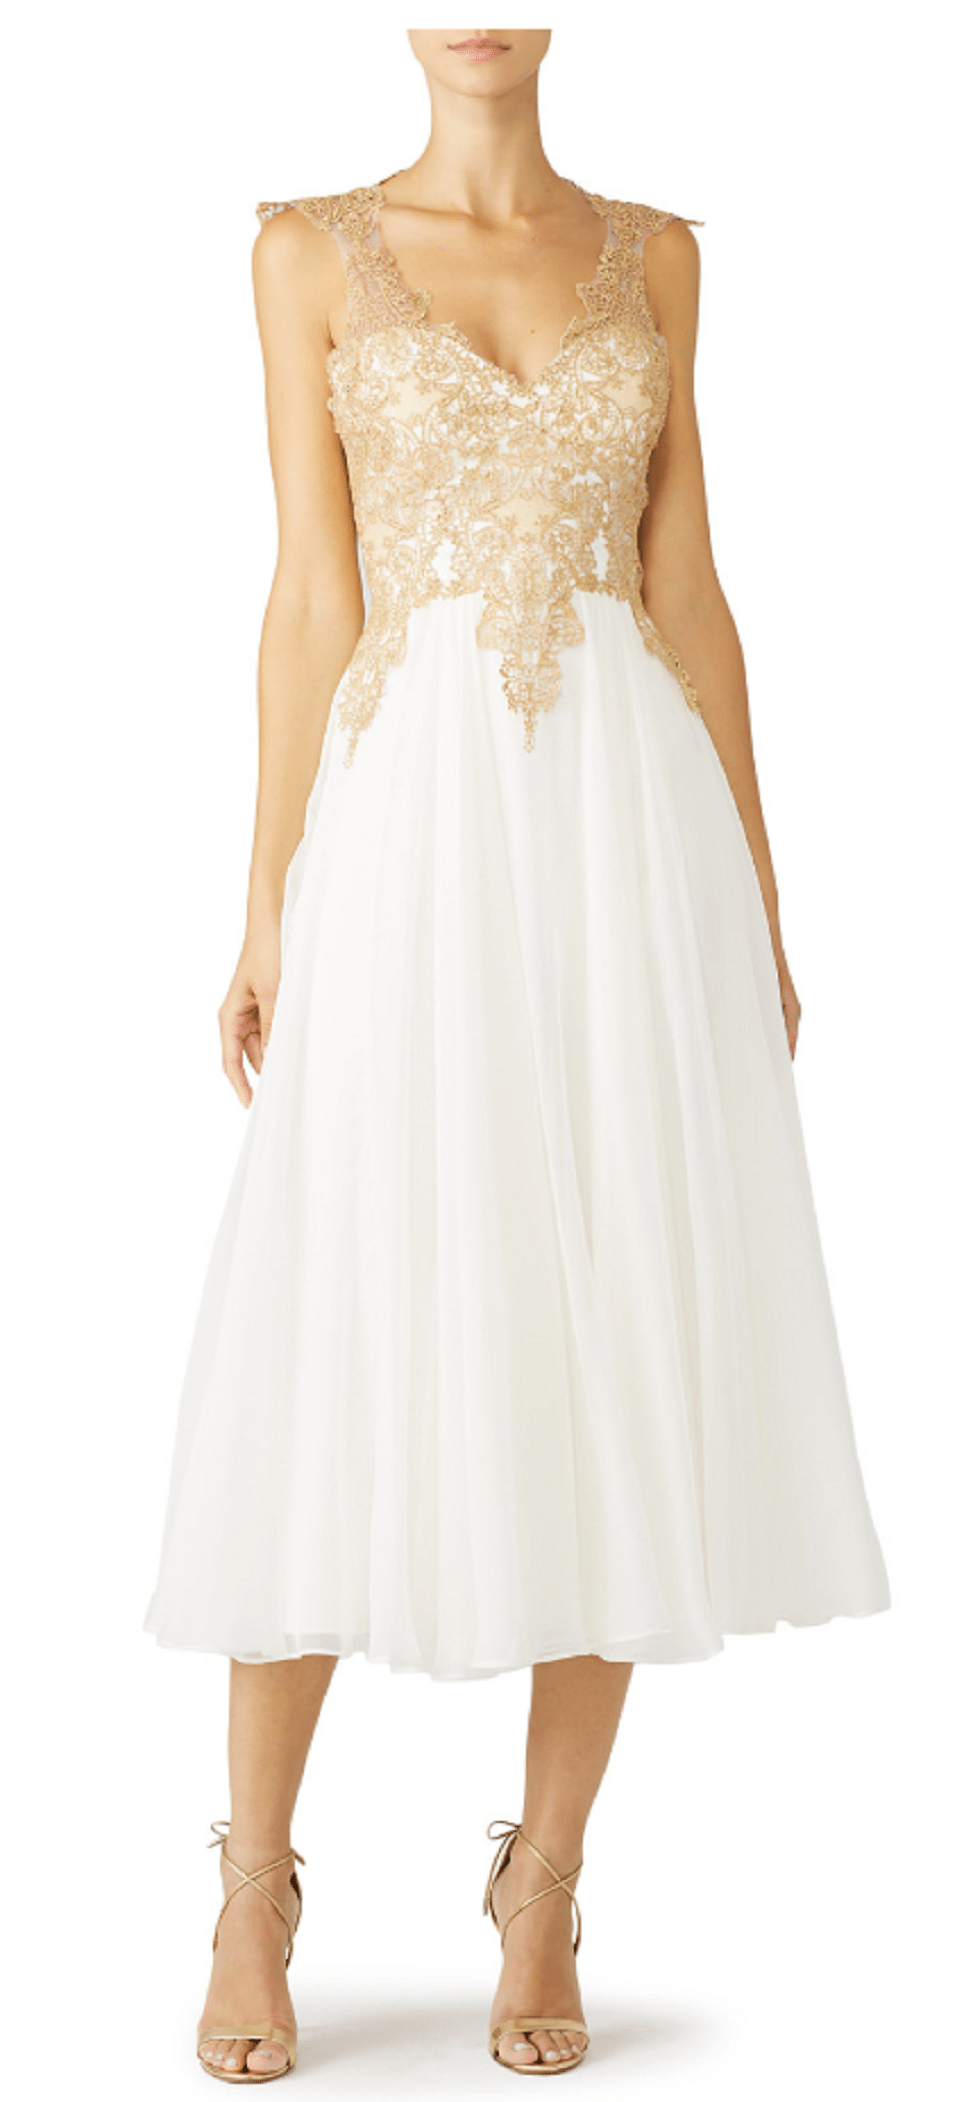 white dress with gold overlay top